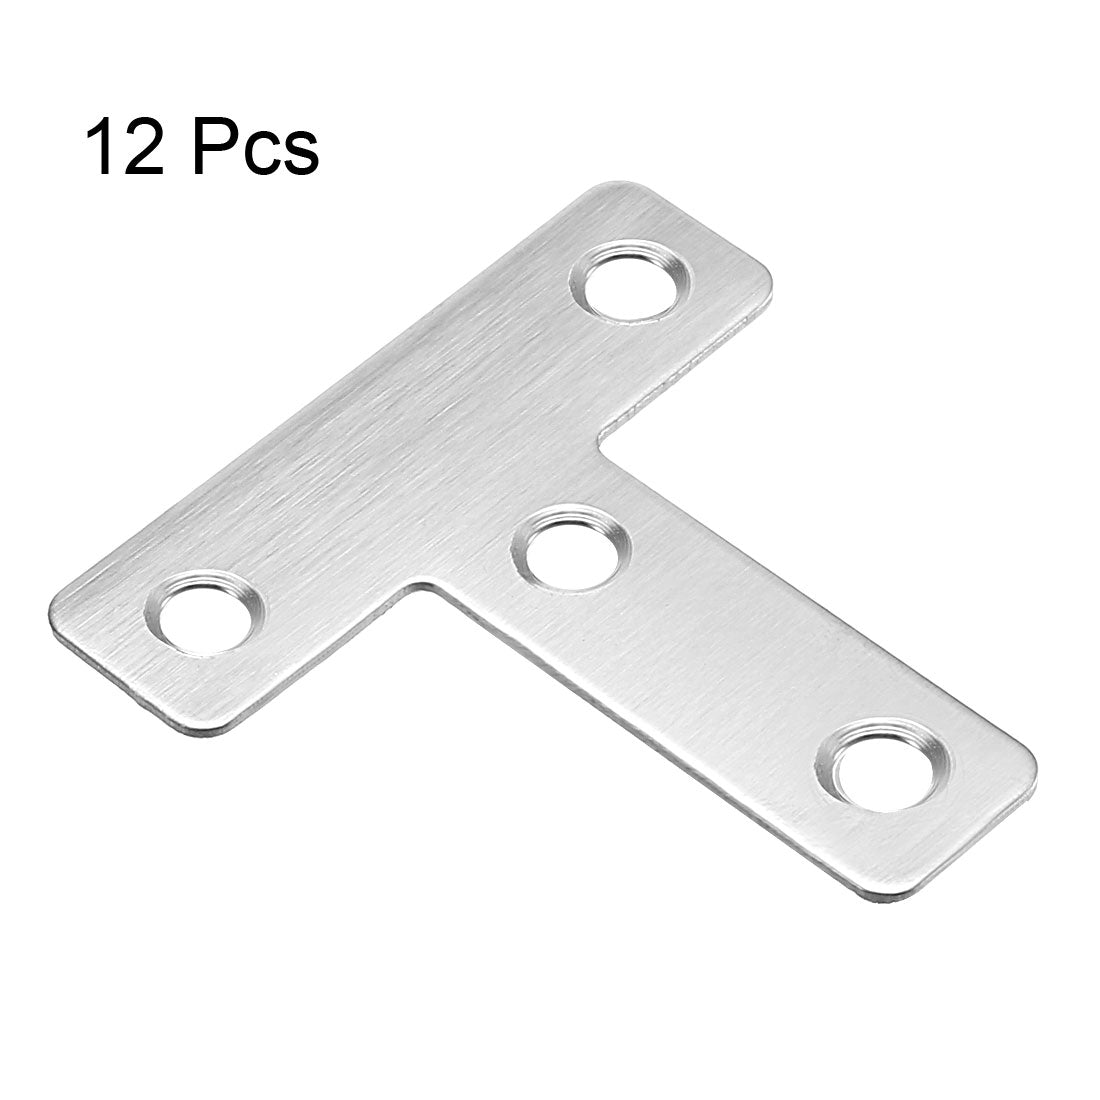 uxcell Uxcell Flat T Shape Repair Mending Plate, 50mmx50mm, Stainless steel Joining Bracket Support Brace, 12 pcs